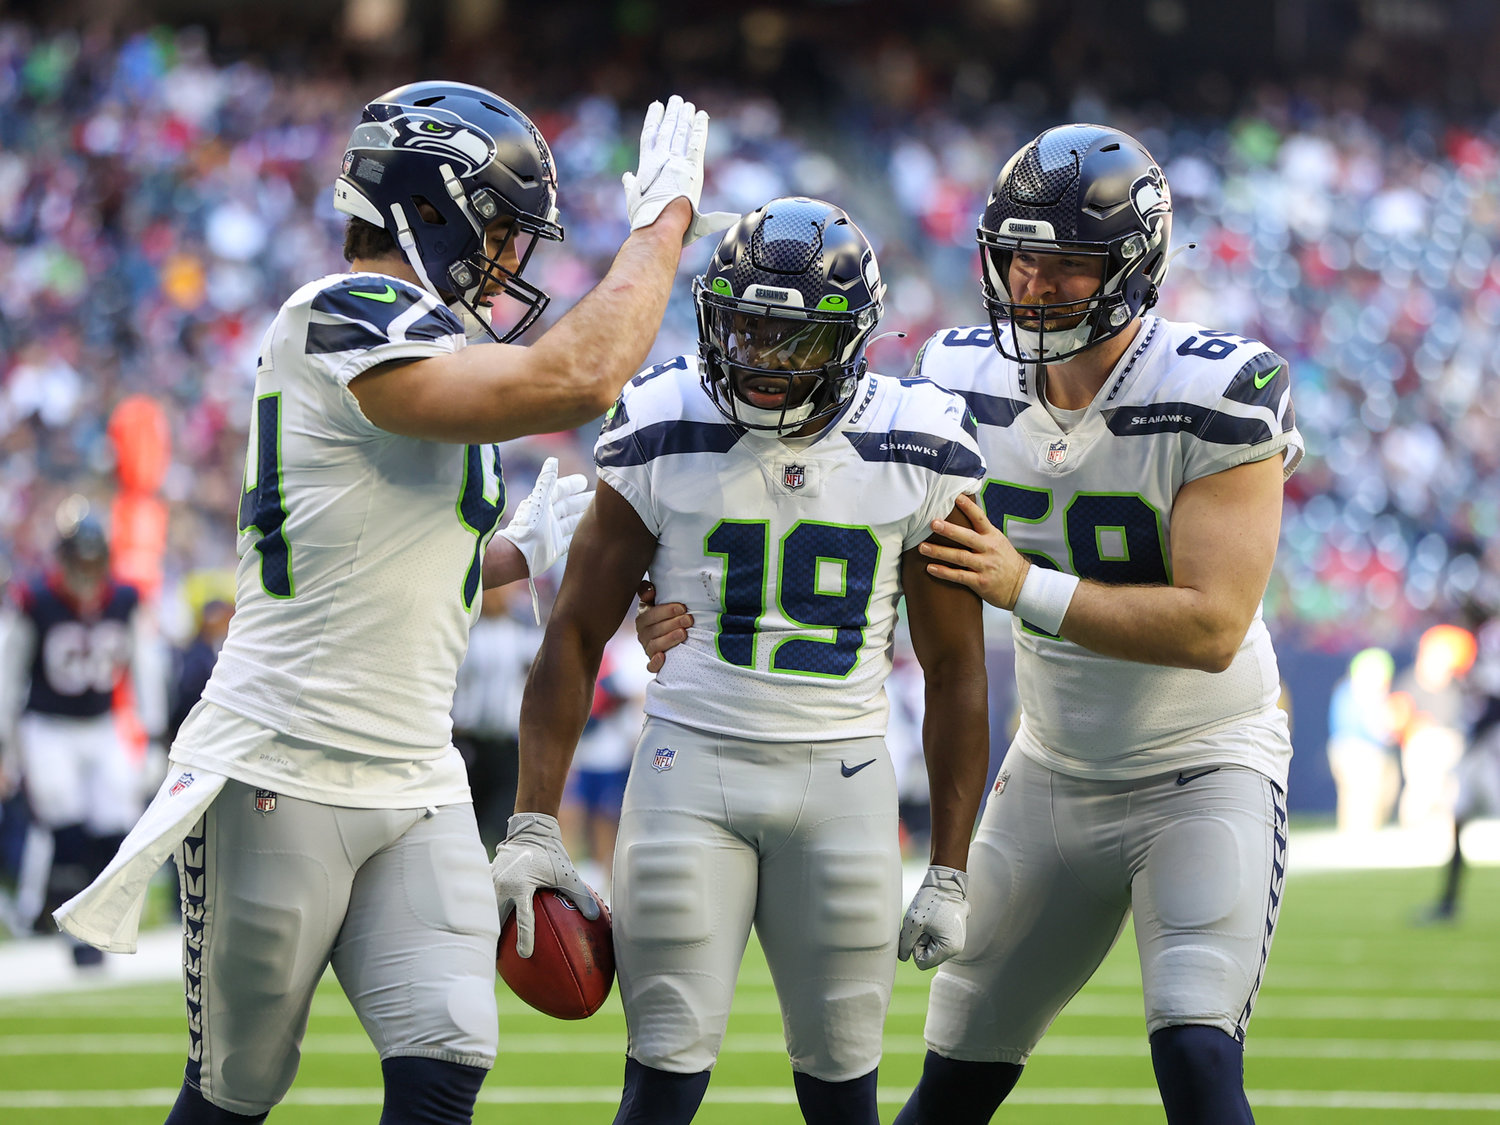 Teammates congratulate Seattle Seahawks wide receiver Penny Hart (19) after downing a punt at the 2-yard line during the first half of an NFL game between the Seahawks and the Texans on December 12, 2021 in Houston, Texas.